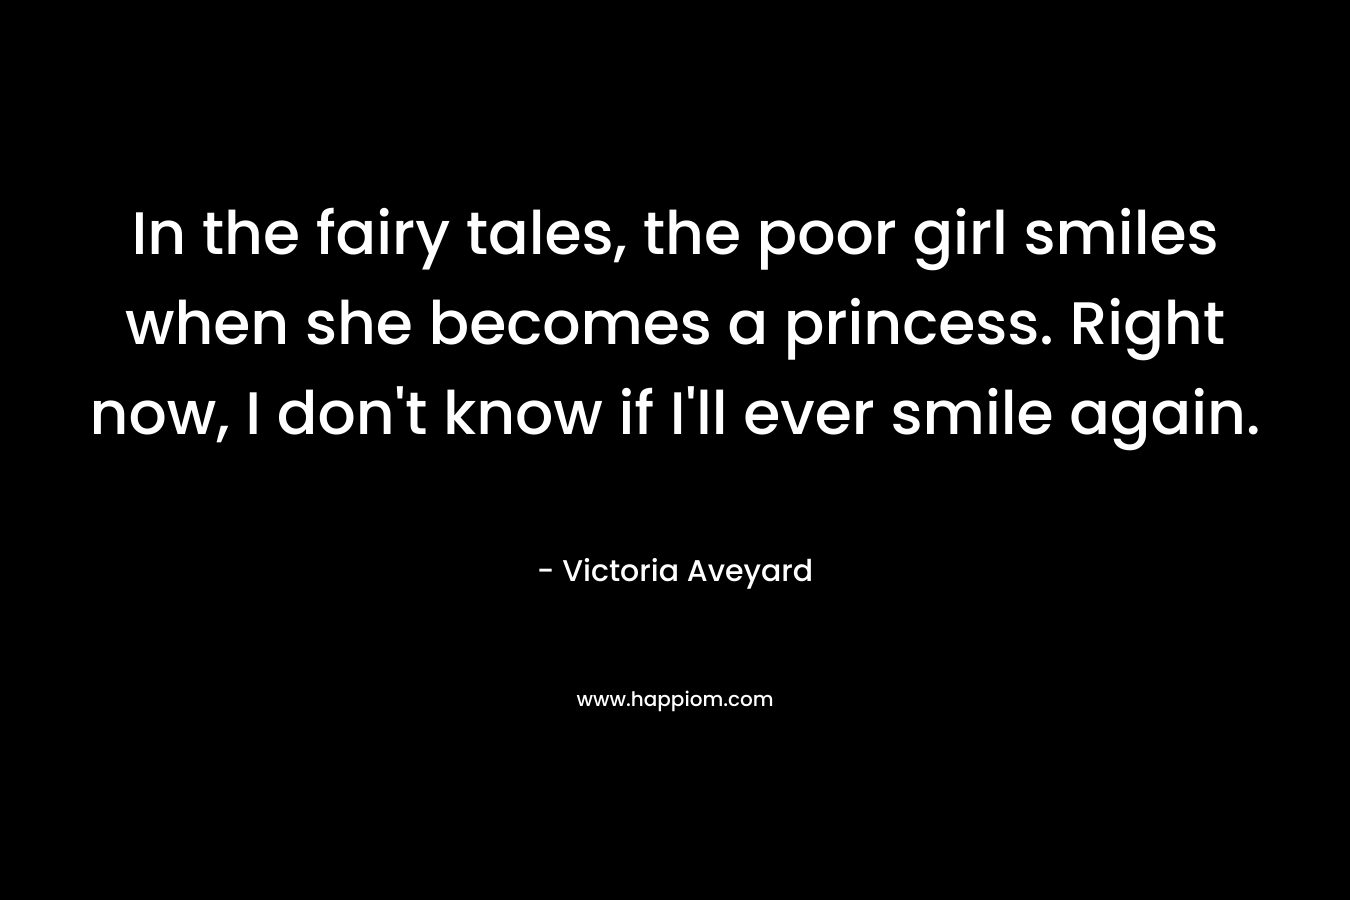 In the fairy tales, the poor girl smiles when she becomes a princess. Right now, I don't know if I'll ever smile again.